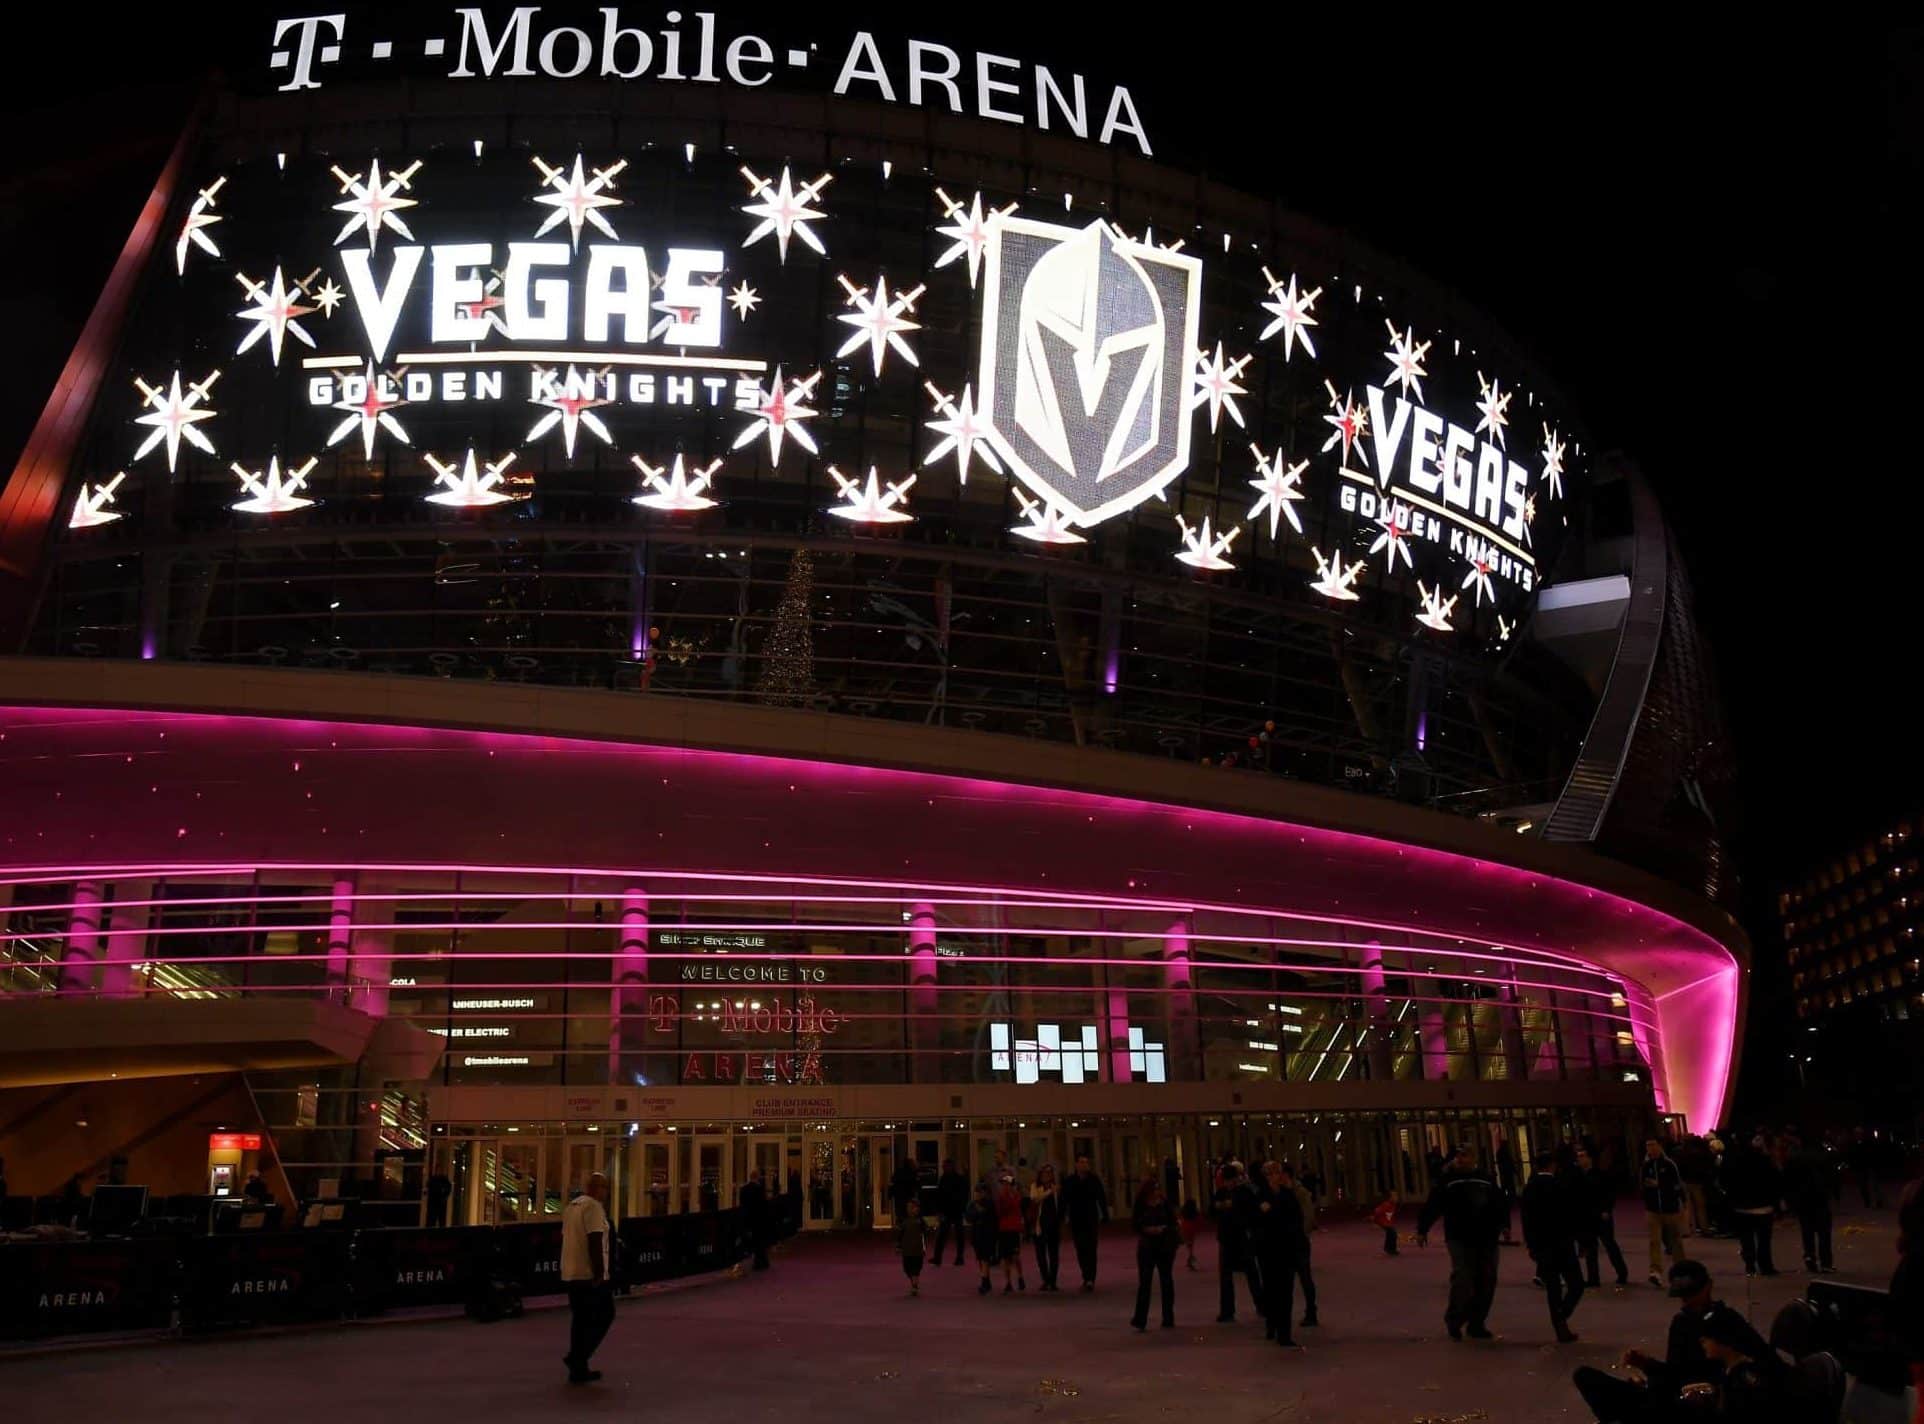 VGK and US Army settle trademark case